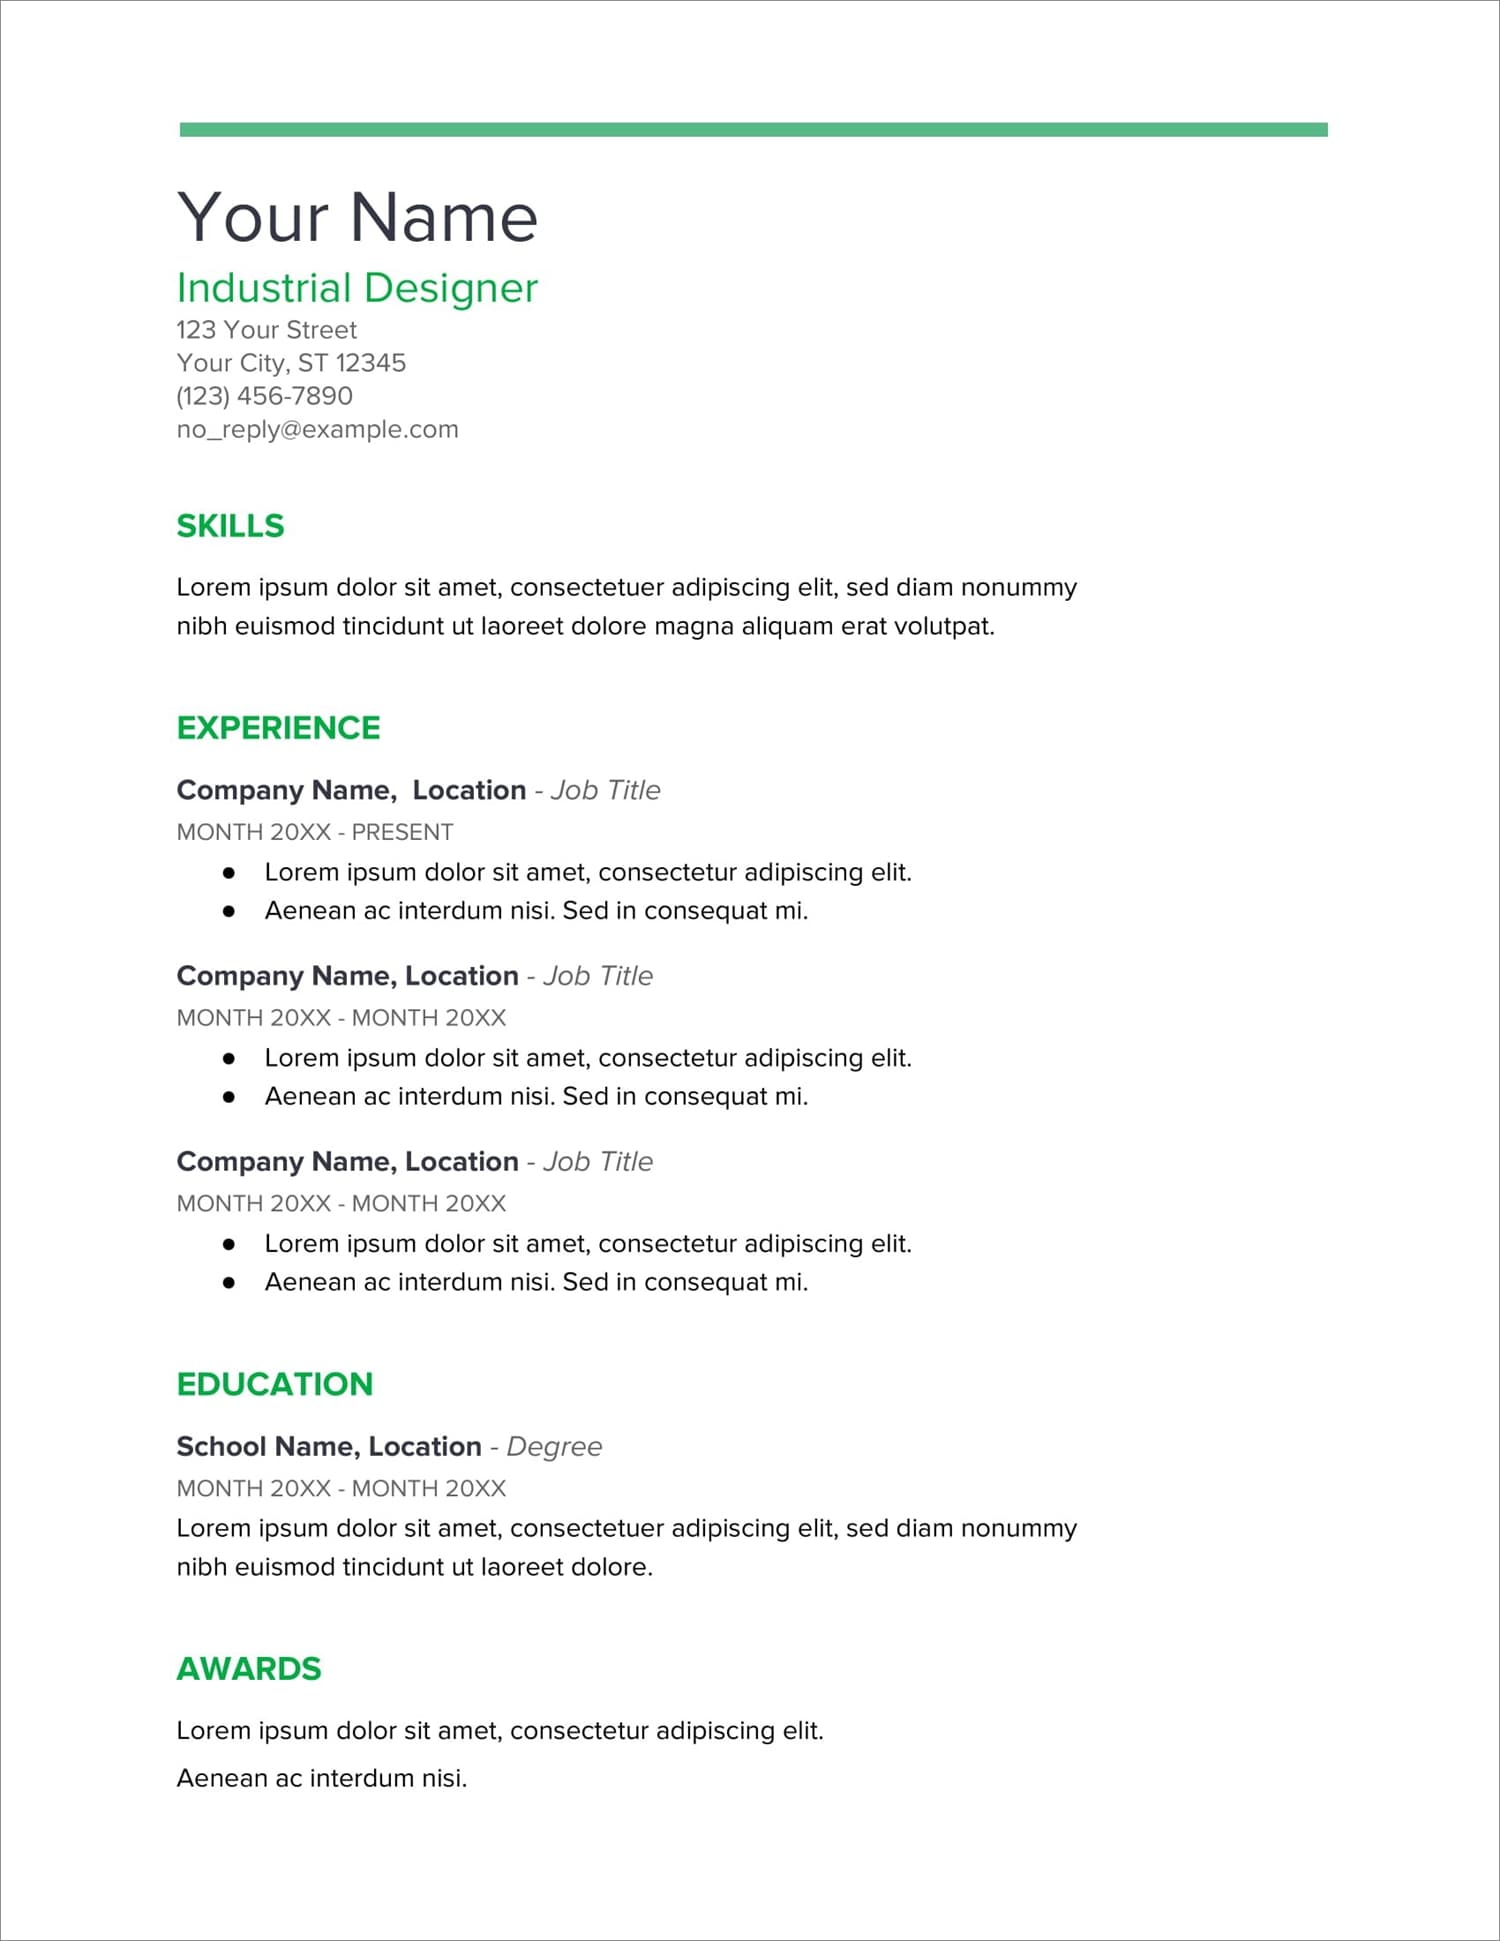 Free Downloadable Resume from cdn-images.zety.com